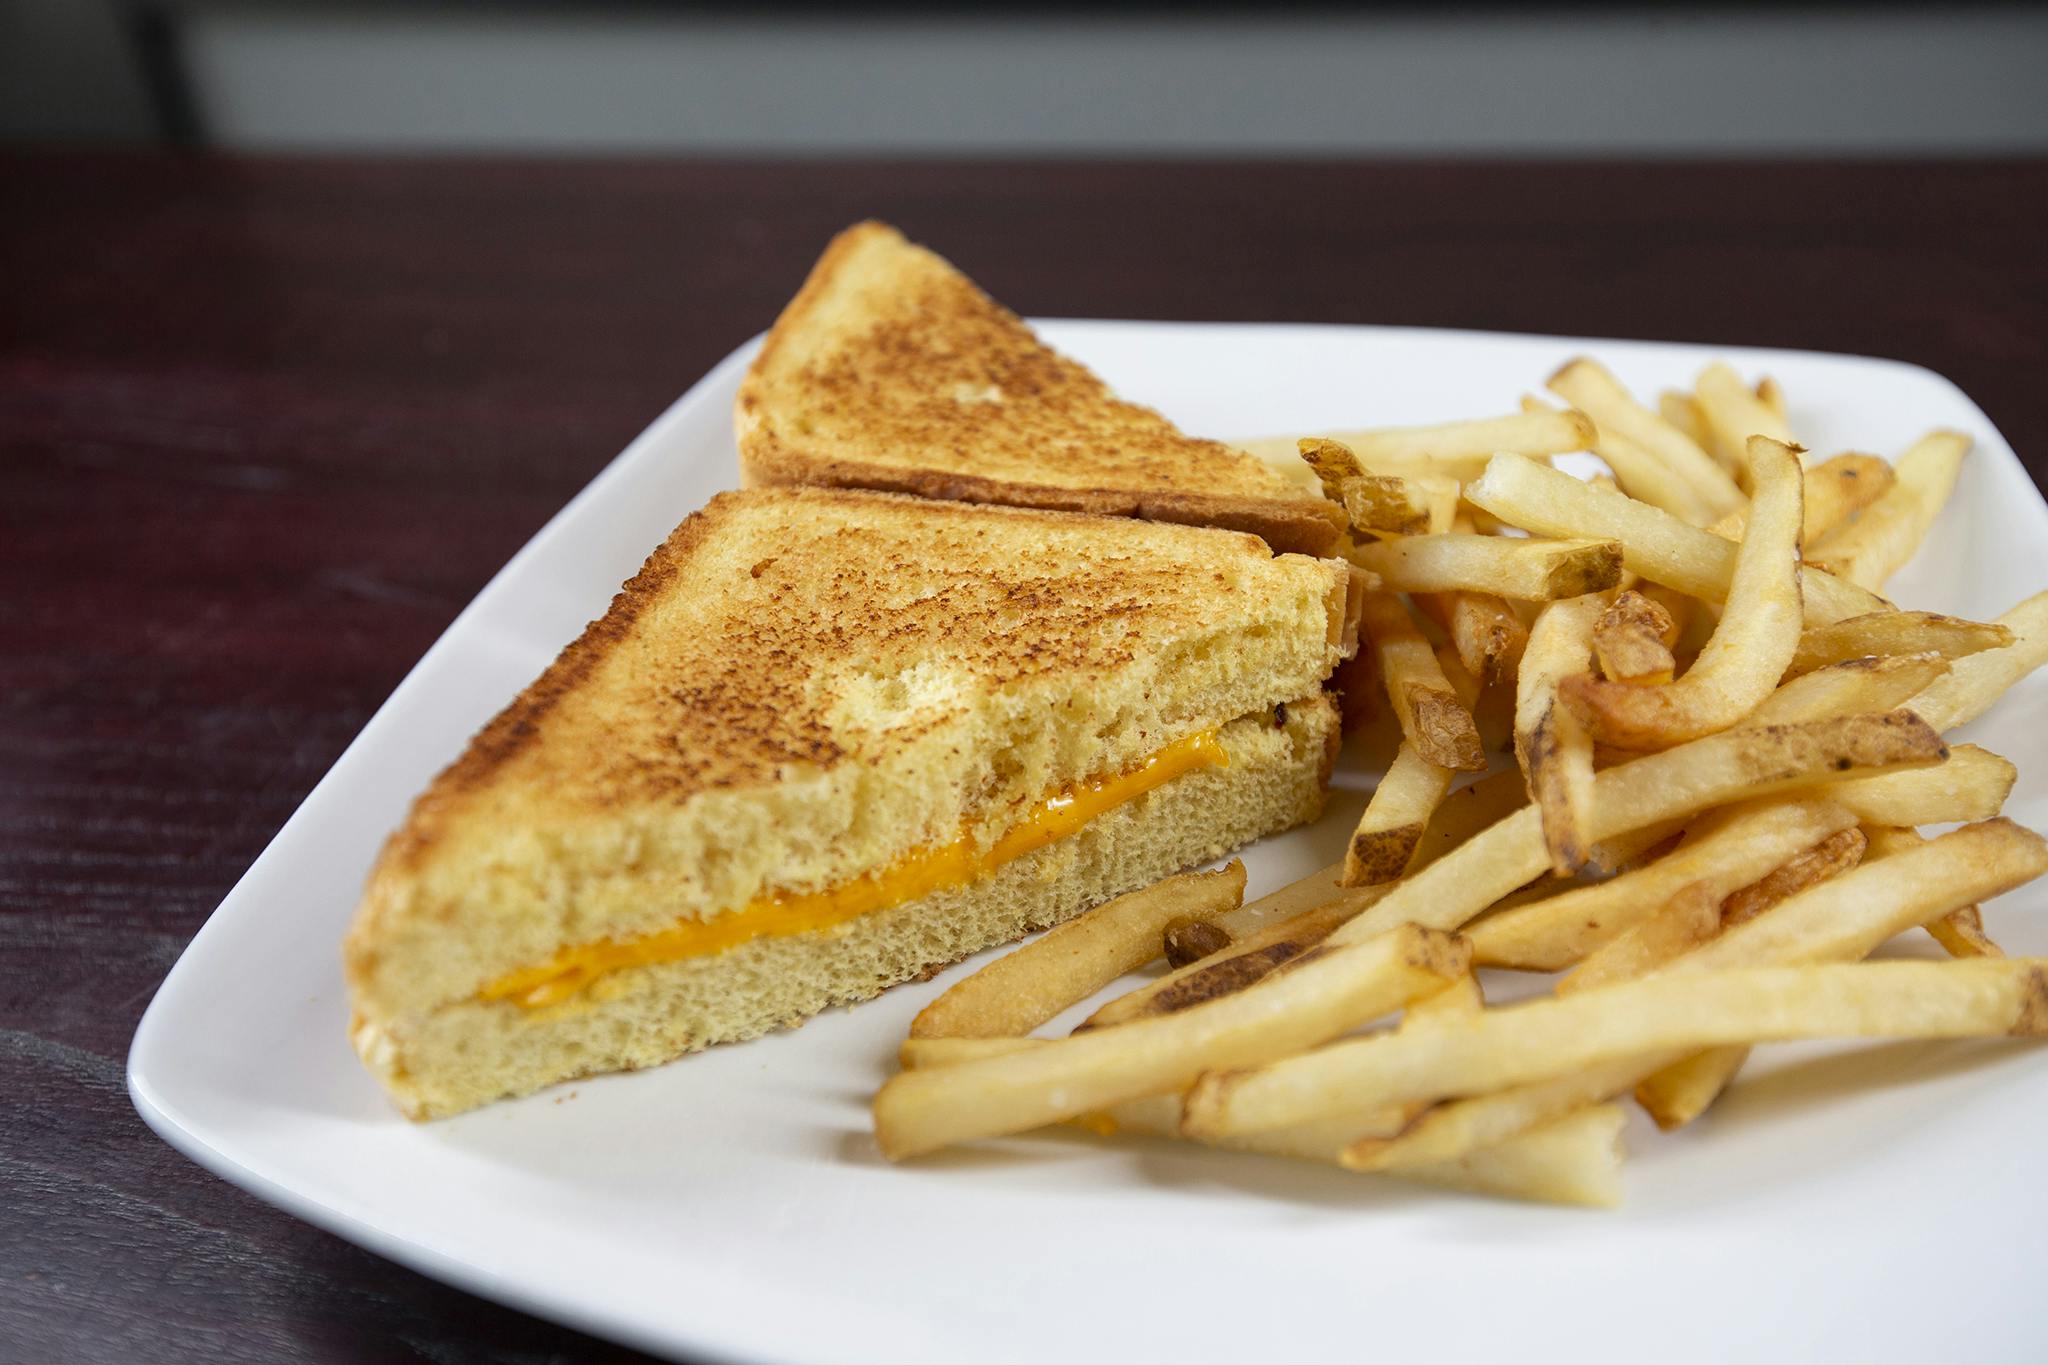 Grilled Cheese from Firehouse Grill - Chicago Ave in Evanston, IL